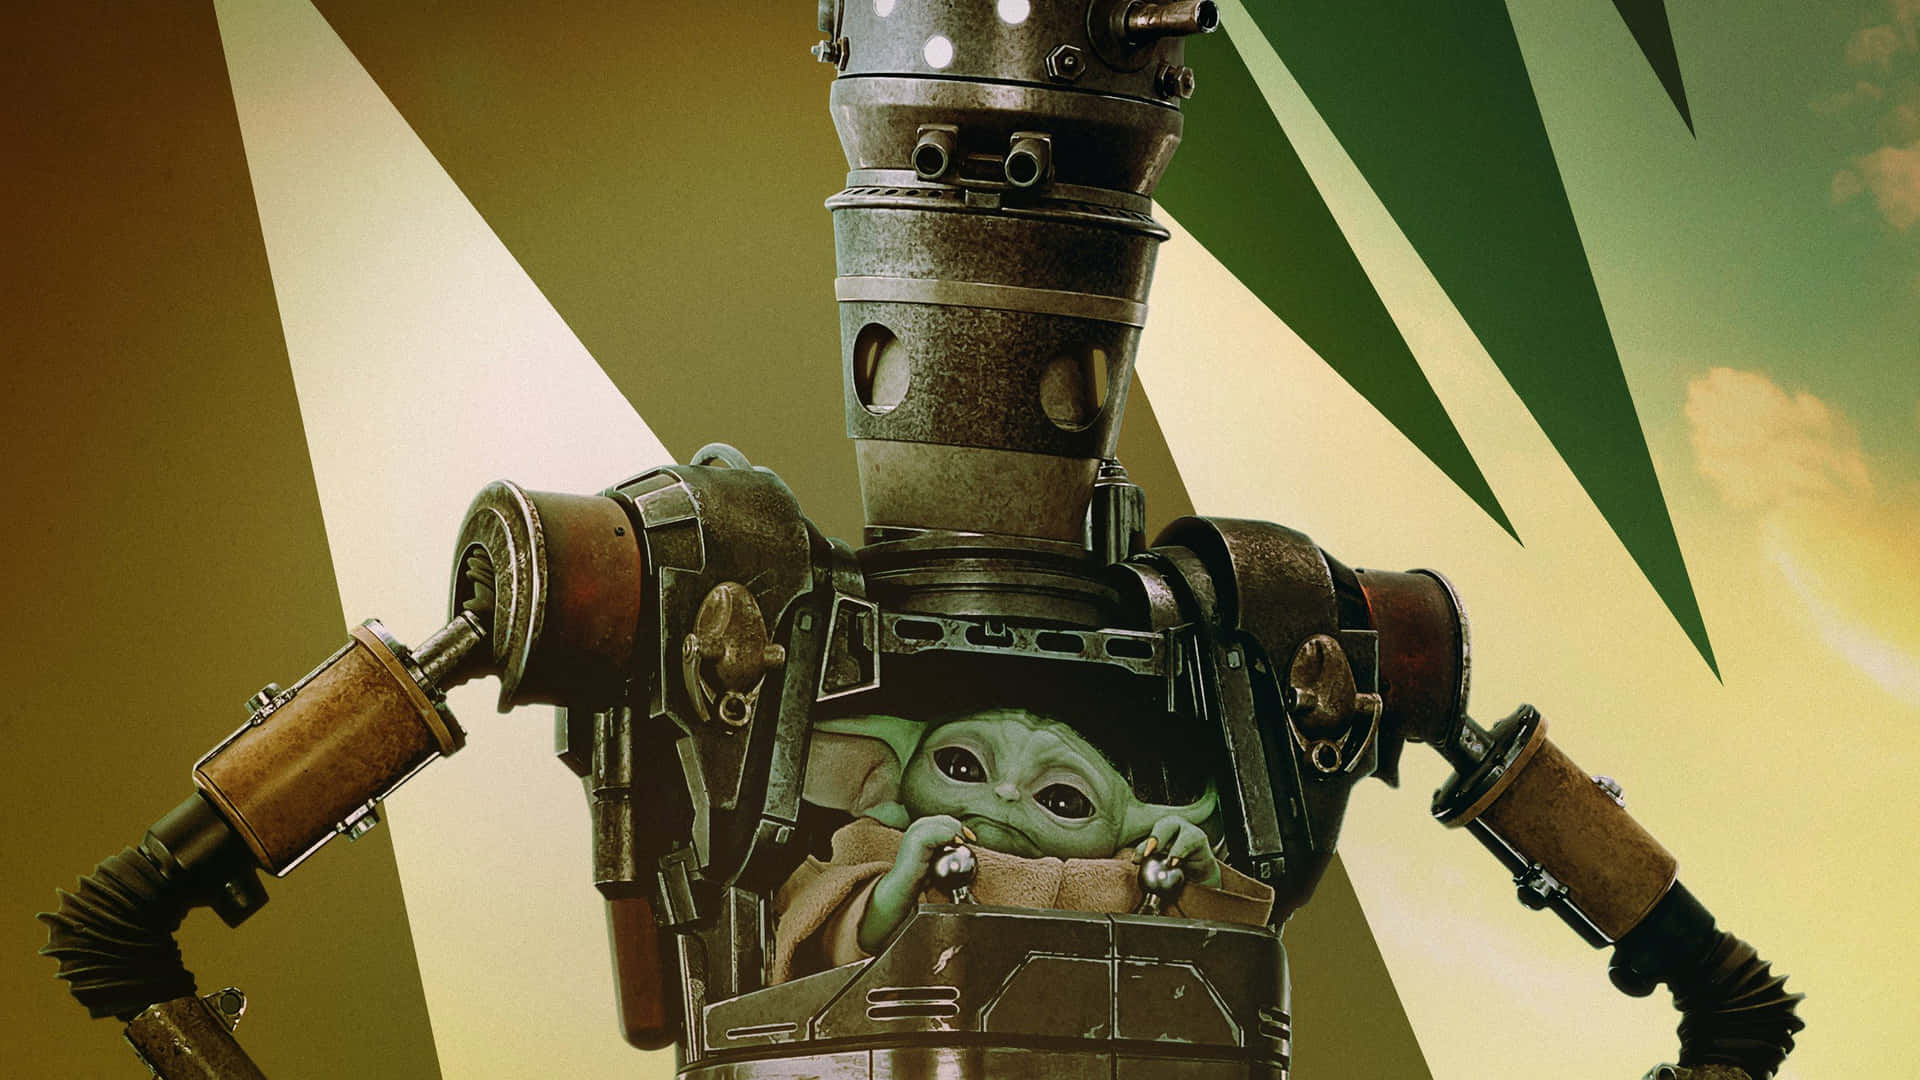 Groguin Podwith Droid Arms Background